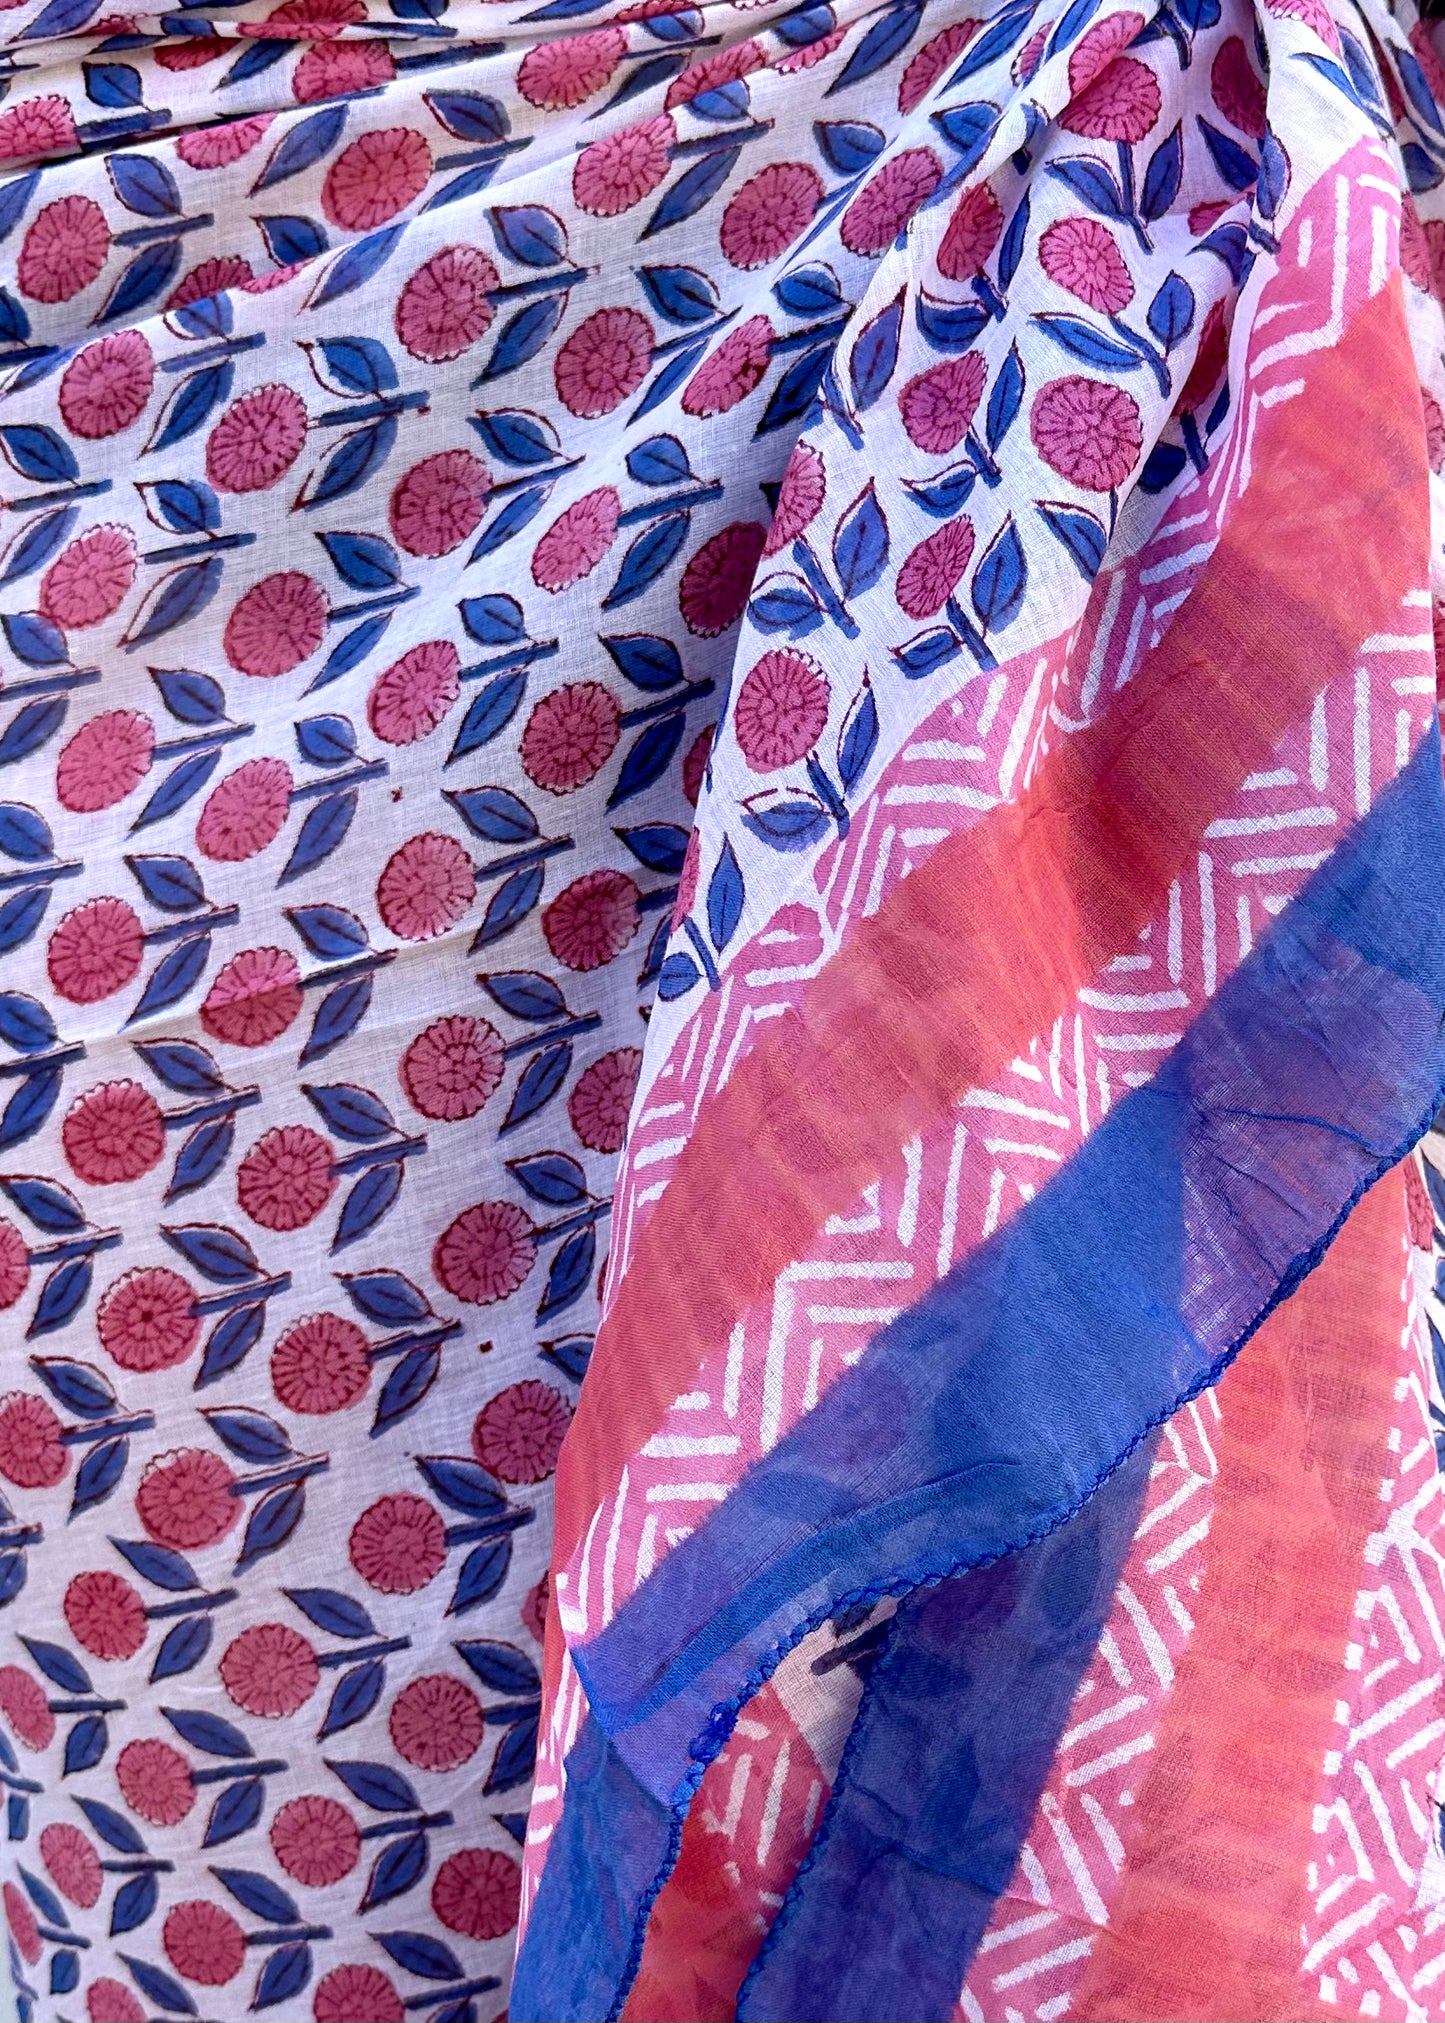 Pink and Blue Block Print Cotton Sarong, Cotton Summer Scarf, Beachwear, Swimsuit Coverup, Bachelorette Gift - DharBazaar